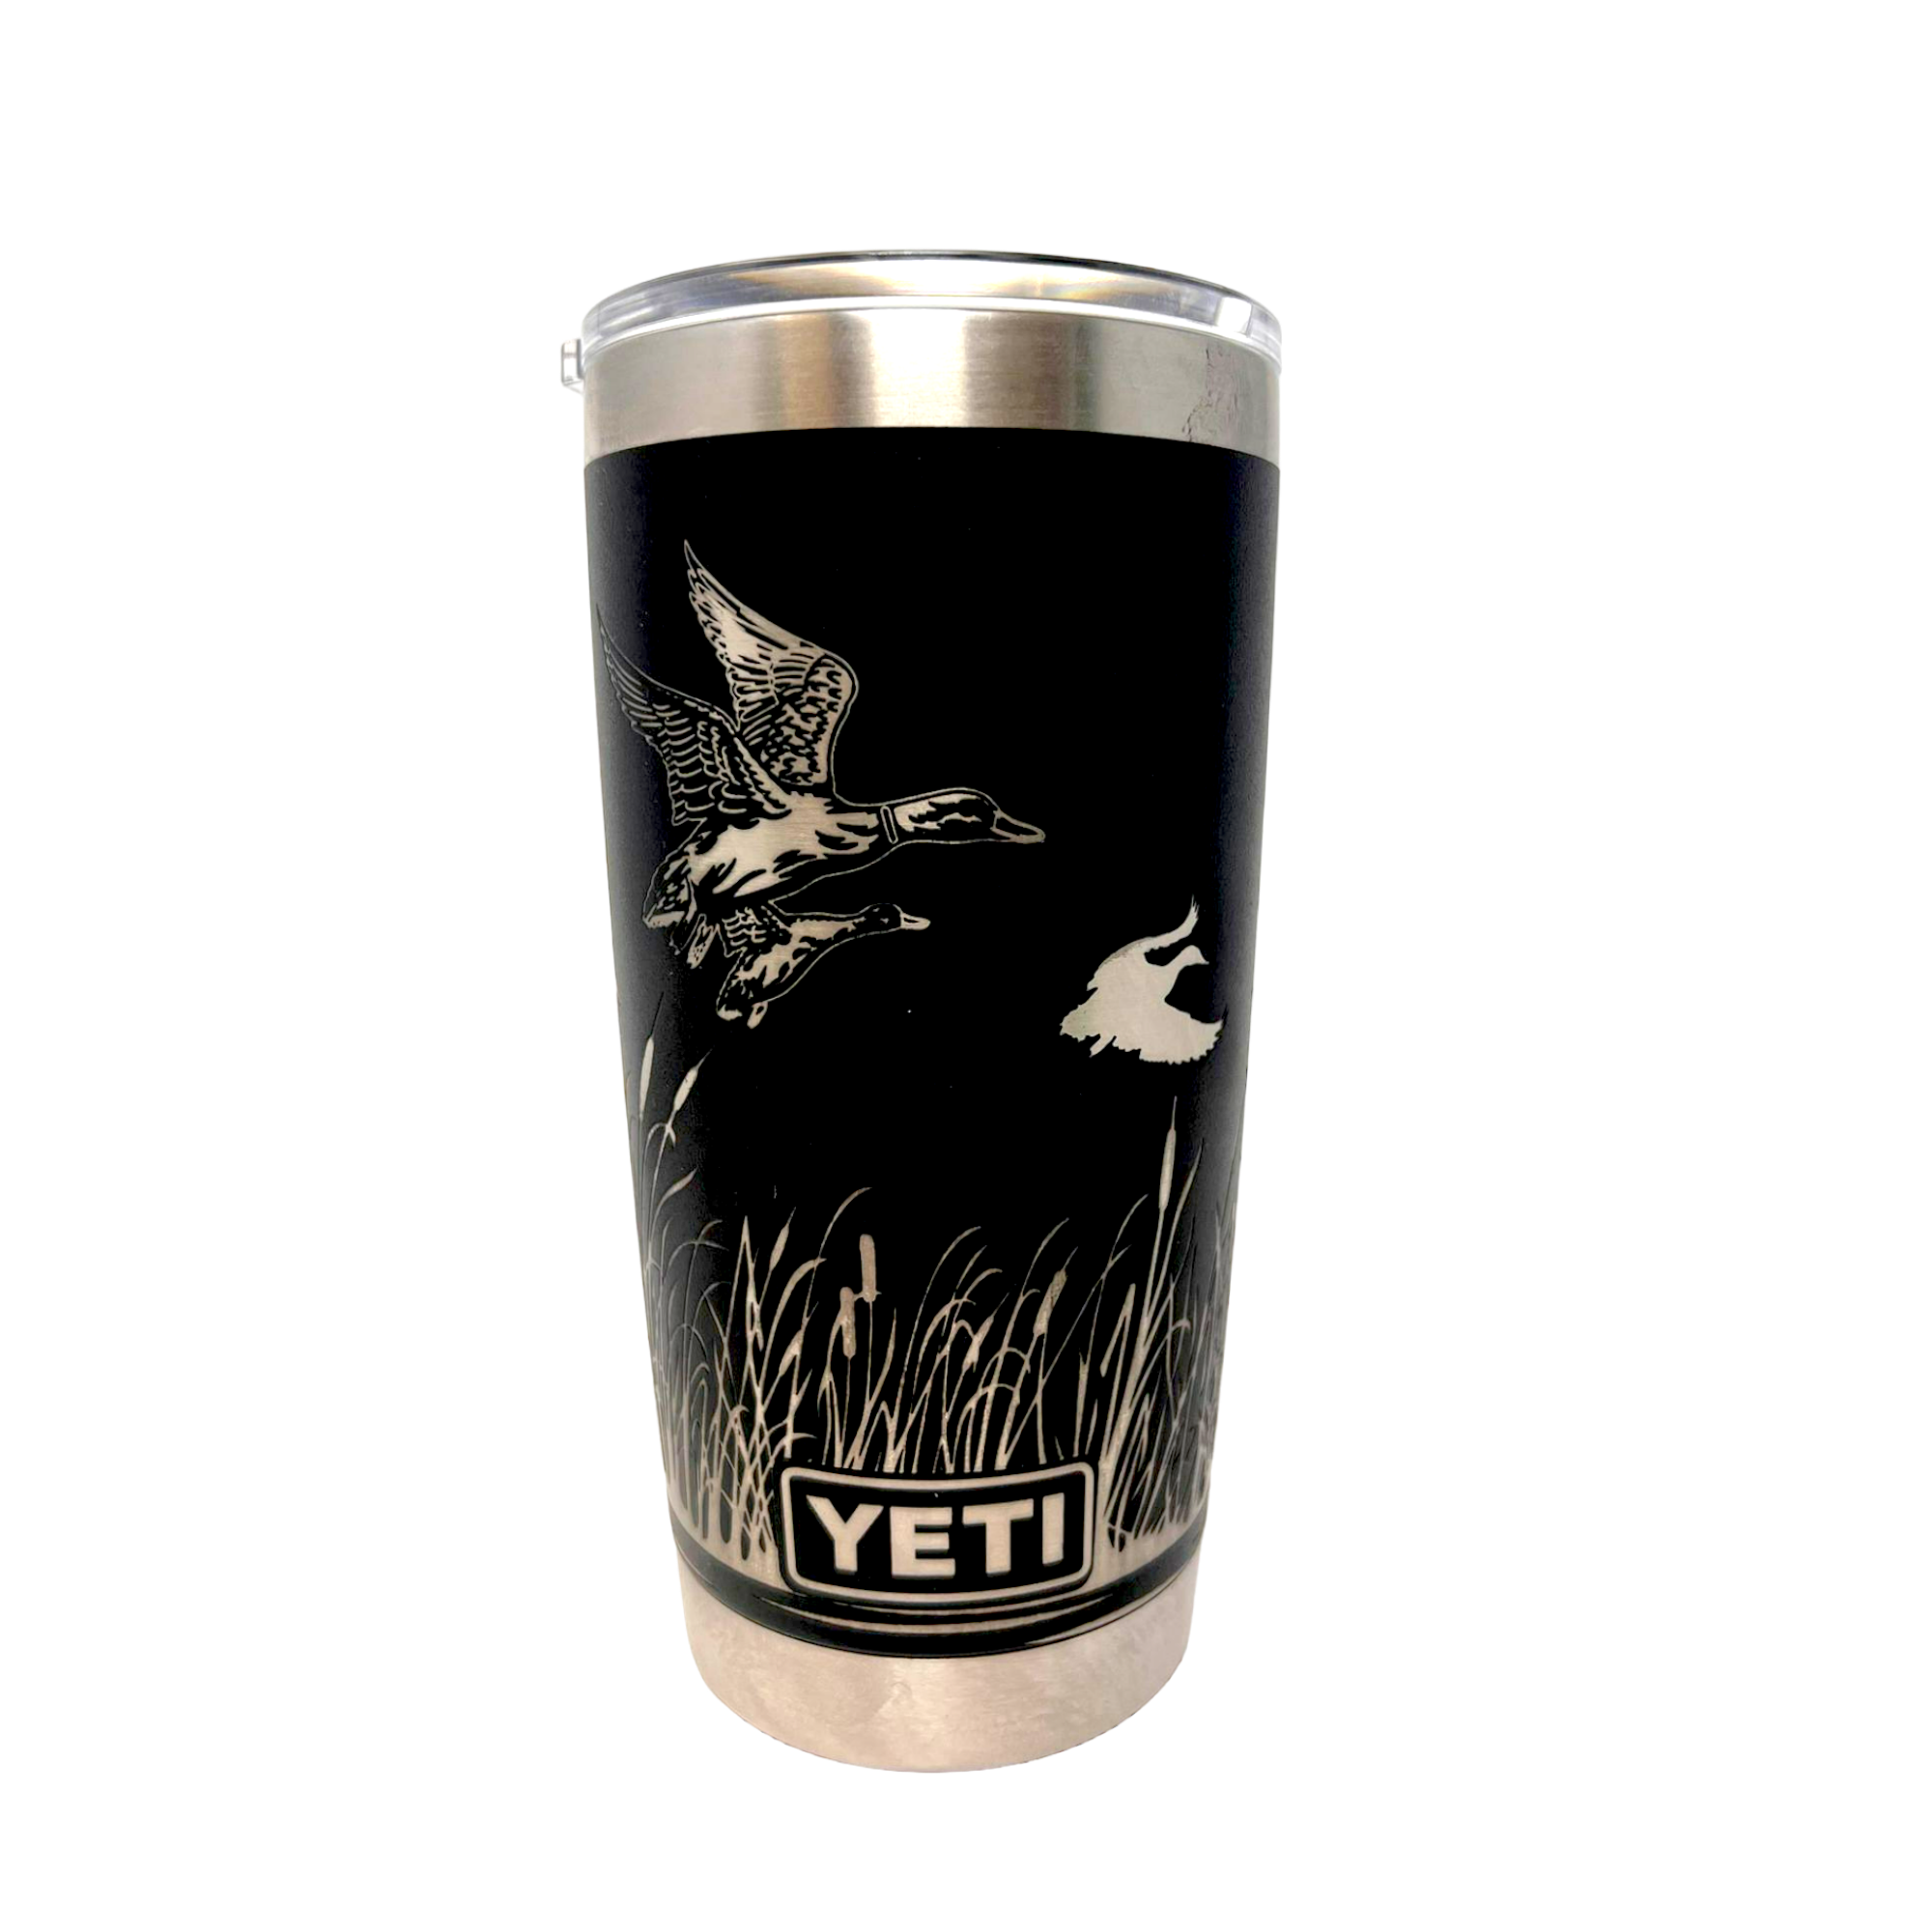 https://cdn.shopify.com/s/files/1/0606/5497/7184/products/wind-river-outpost-duck-hunting-yeti-front_2000x.png?v=1679171654